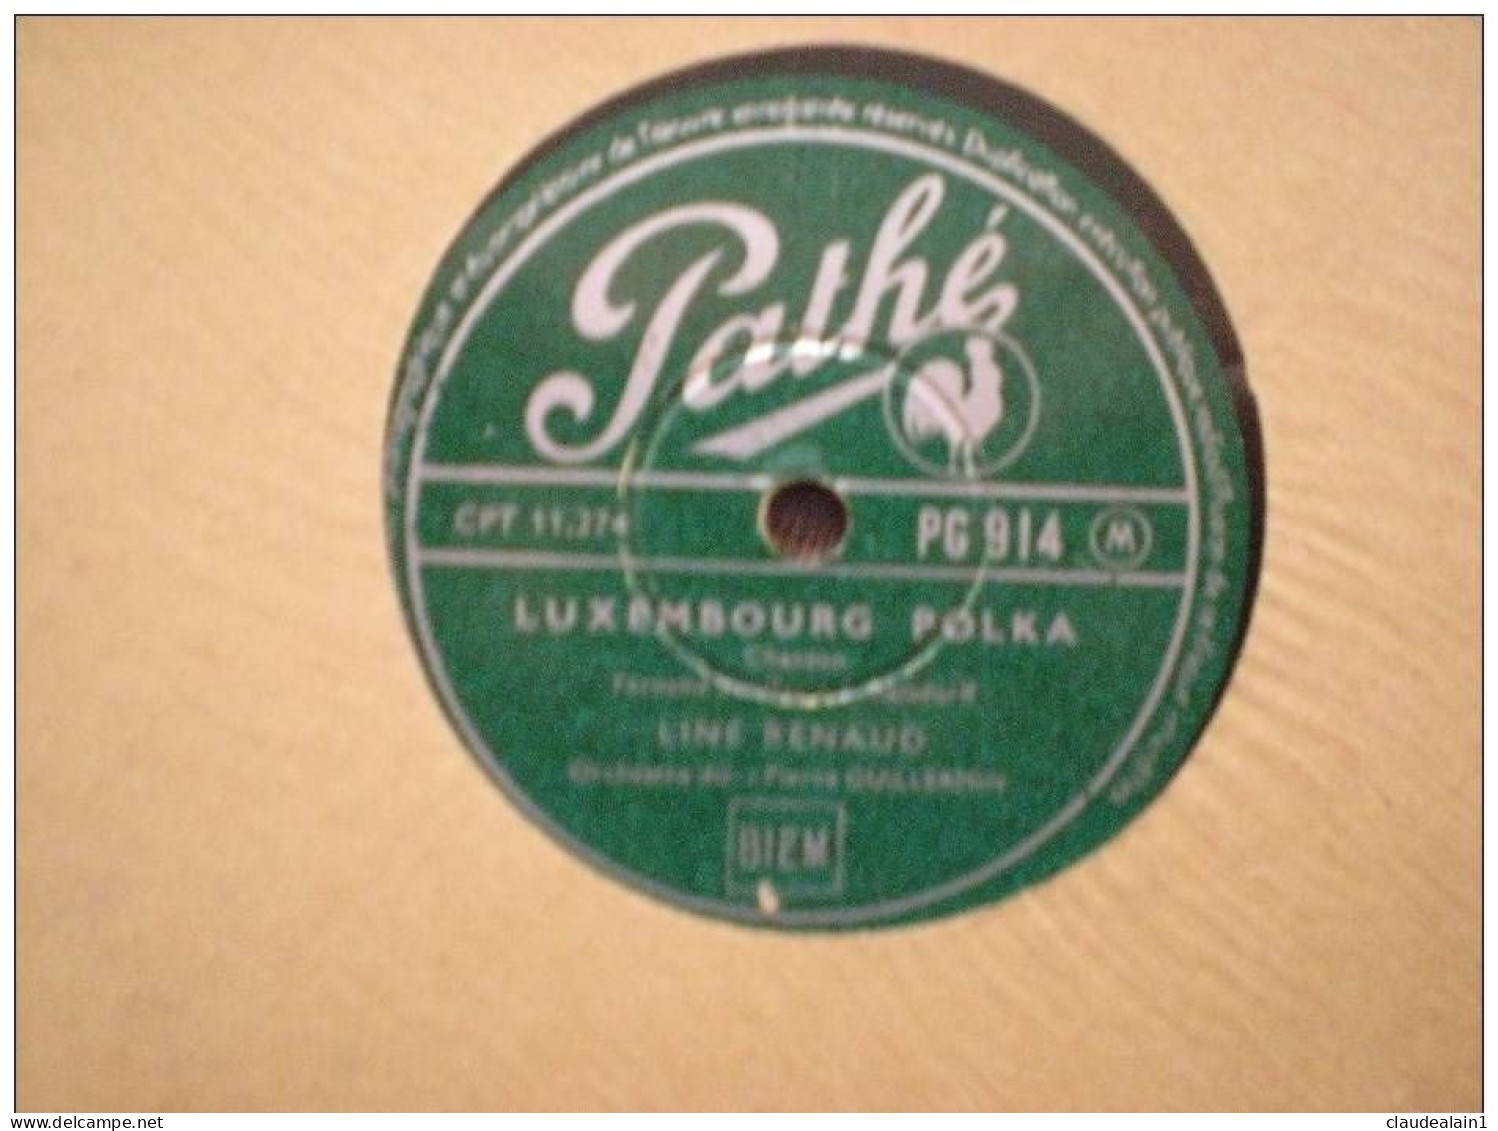 DISQUE PATHE VINYLE 78T - LINE RENAUD - LUXEMBOURG POLKA - PROTEGE-MOI - 78 T - Disques Pour Gramophone